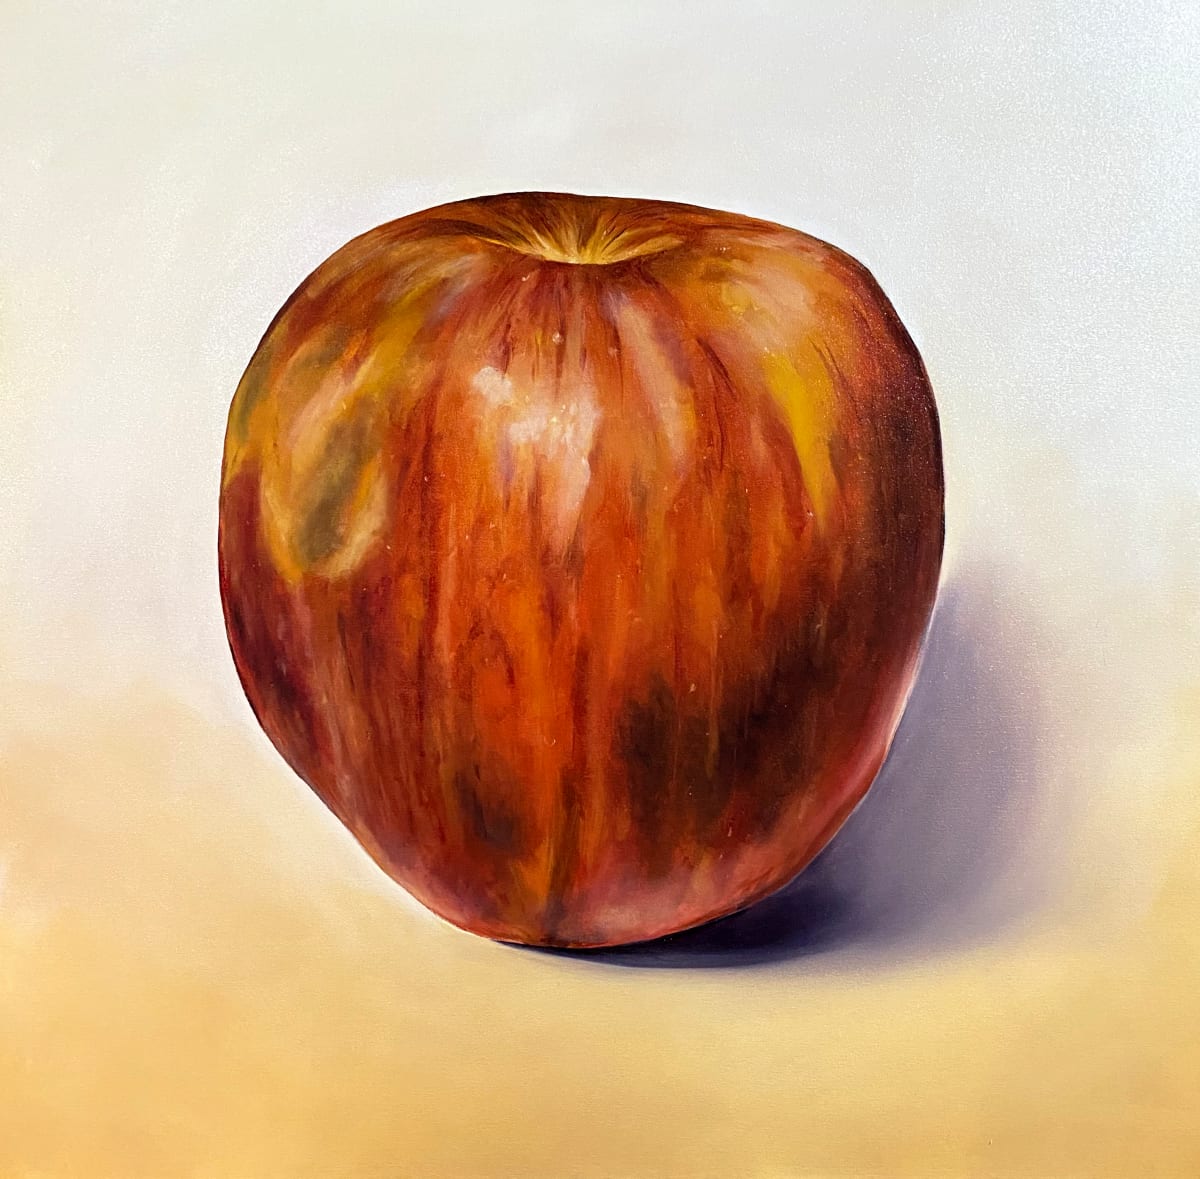 The Big Apple by Kristen Wickersham  Image: Beautifully rendered single red apple on canvas.